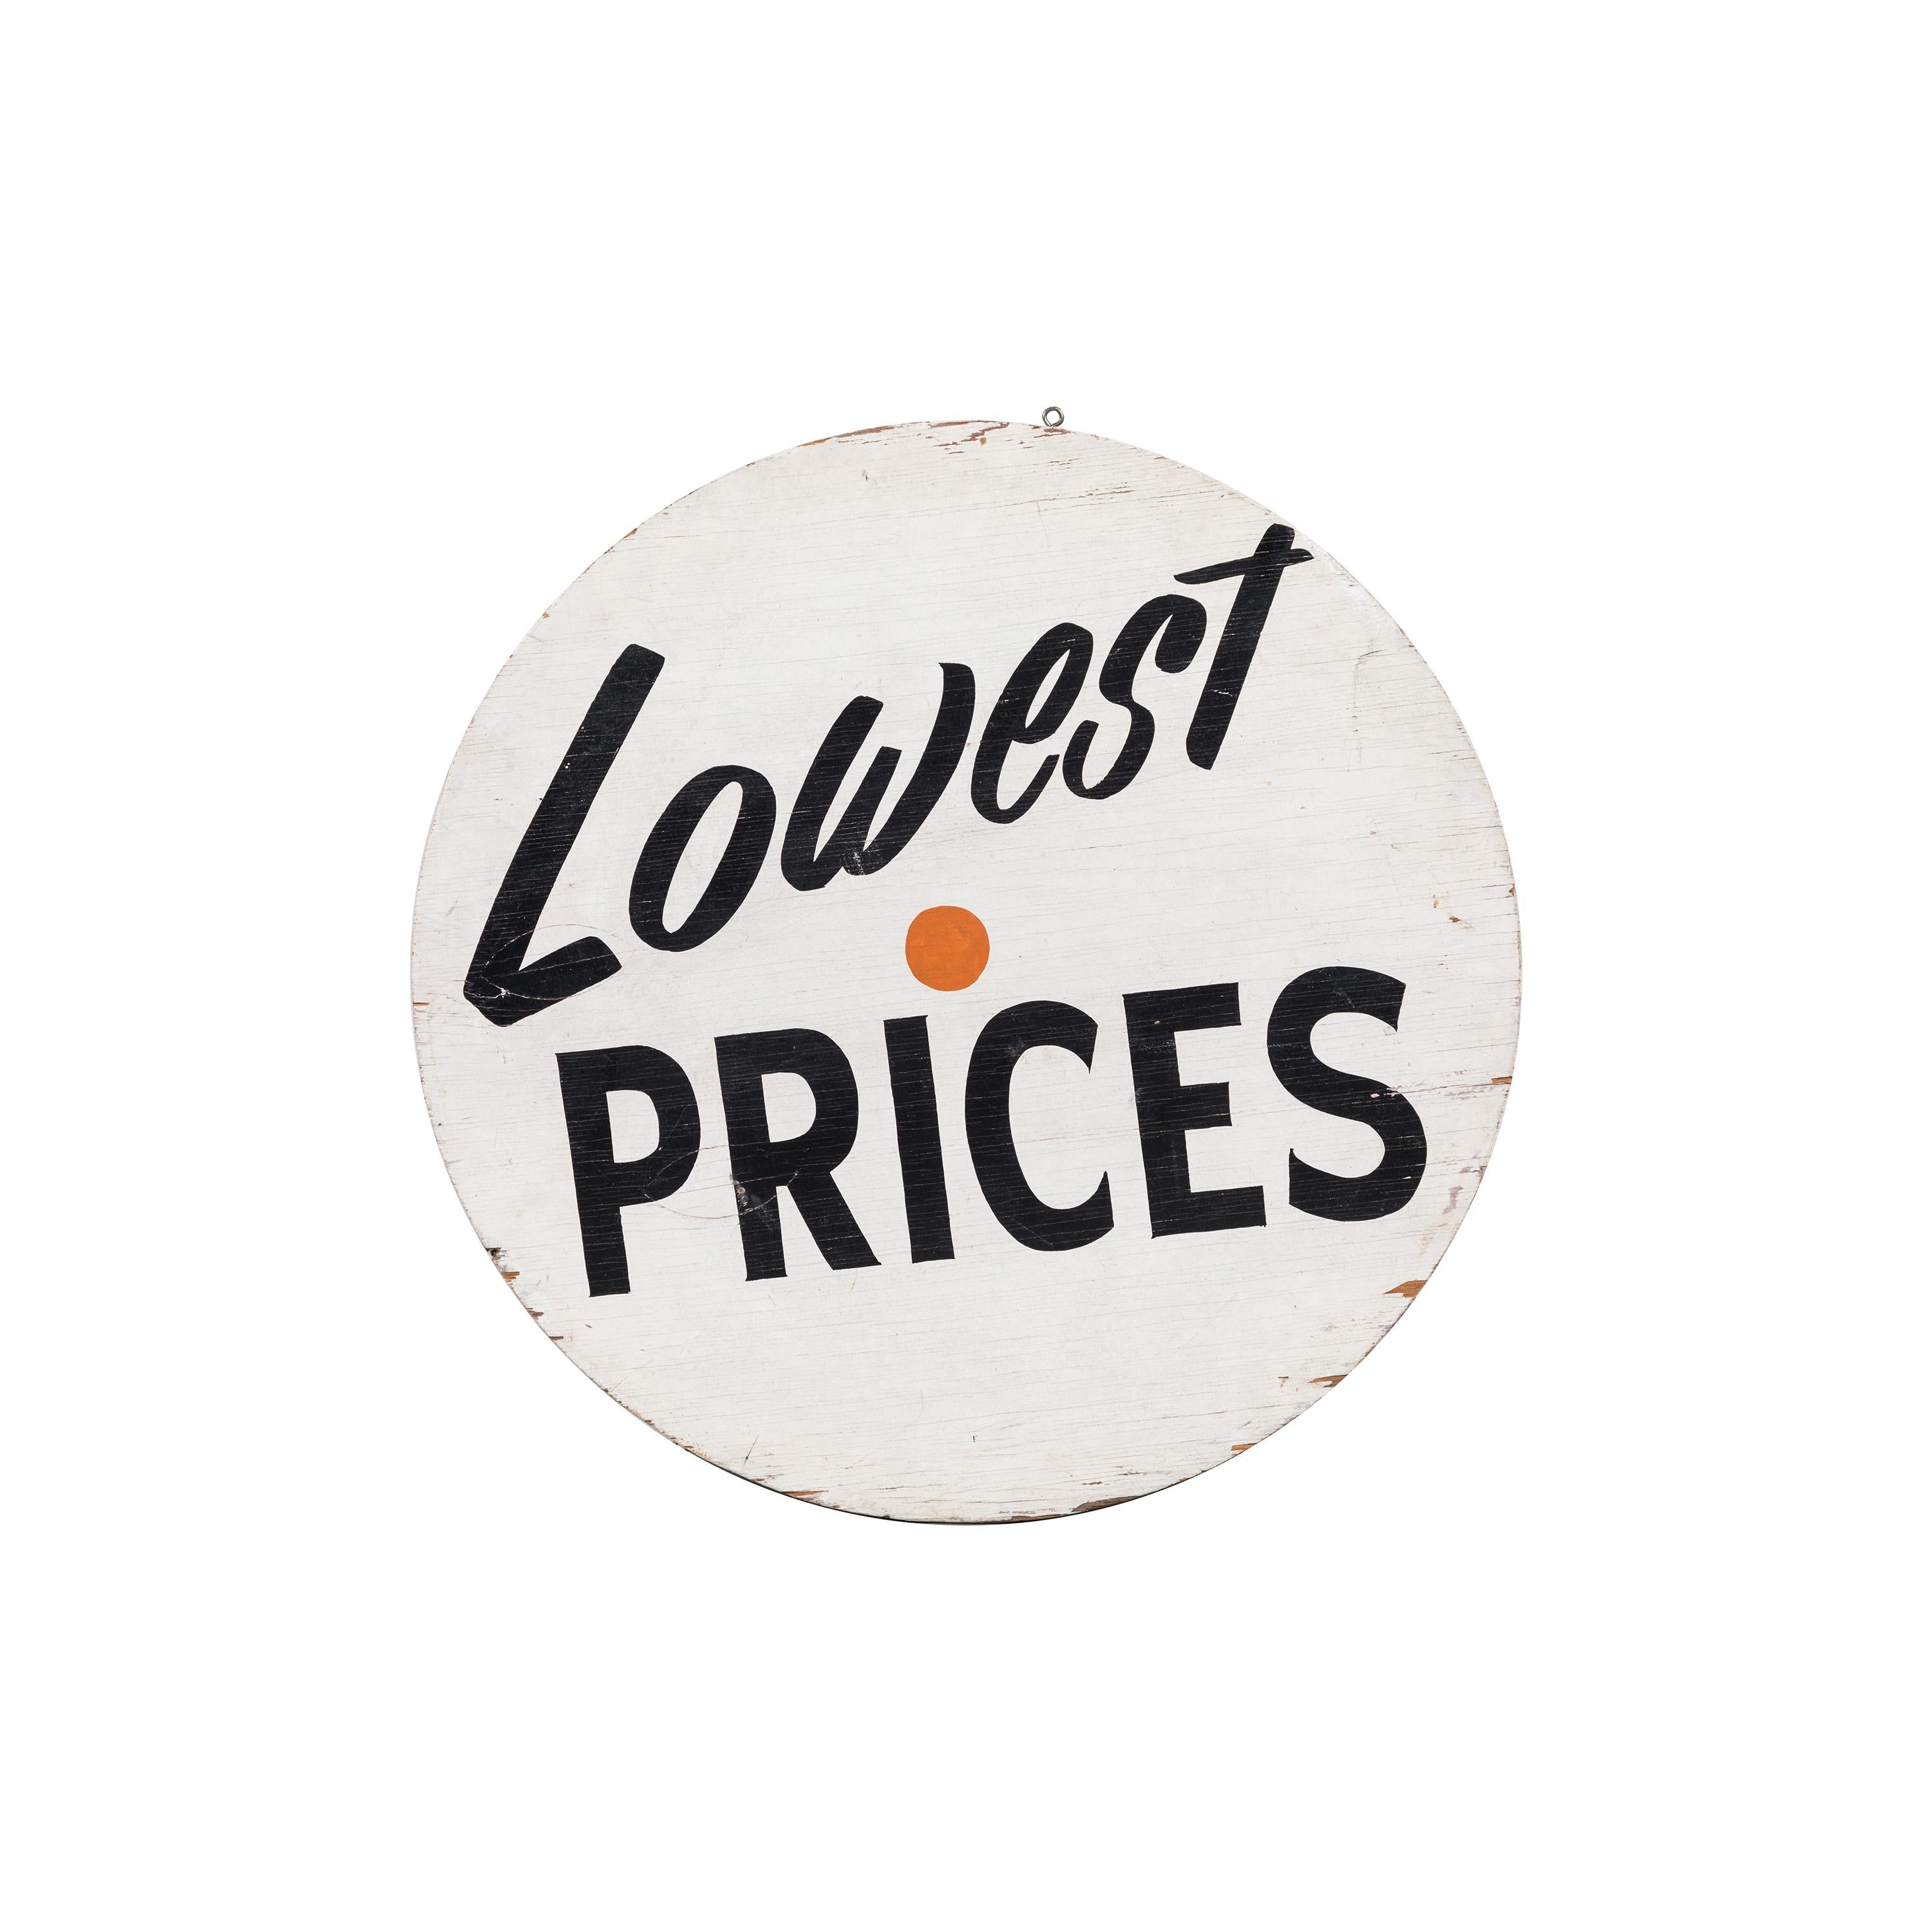 Vintage "Lowest Prices" Grocery Market Trade Sign